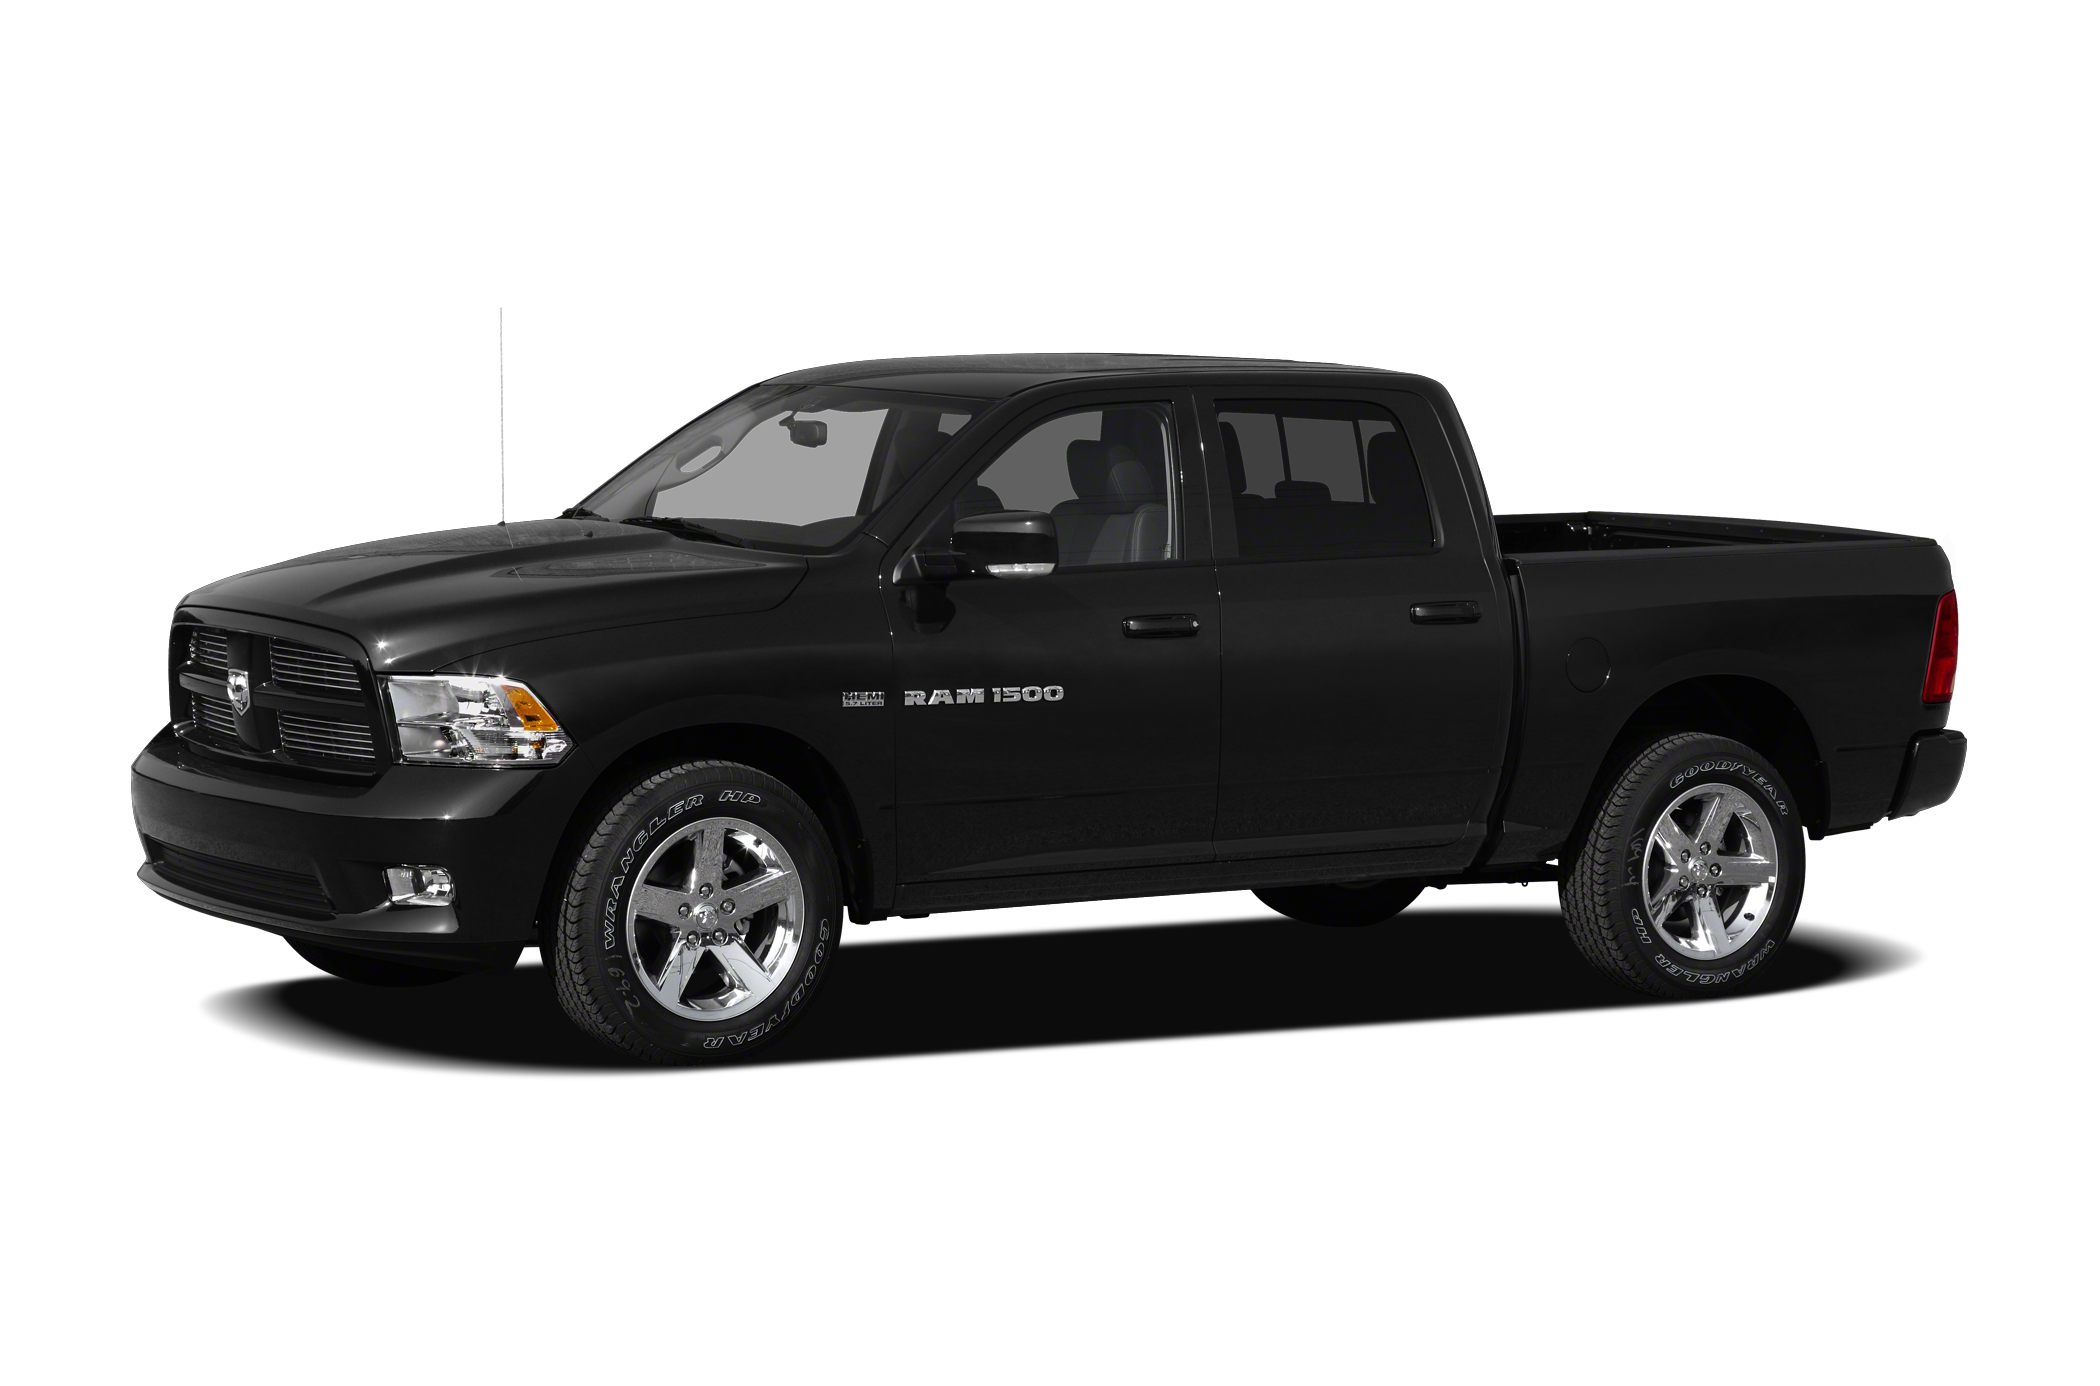 2012 Ram 1500 Laramie Longhorn Limited Edition 4x2 Crew Cab 140 In Wb Pictures